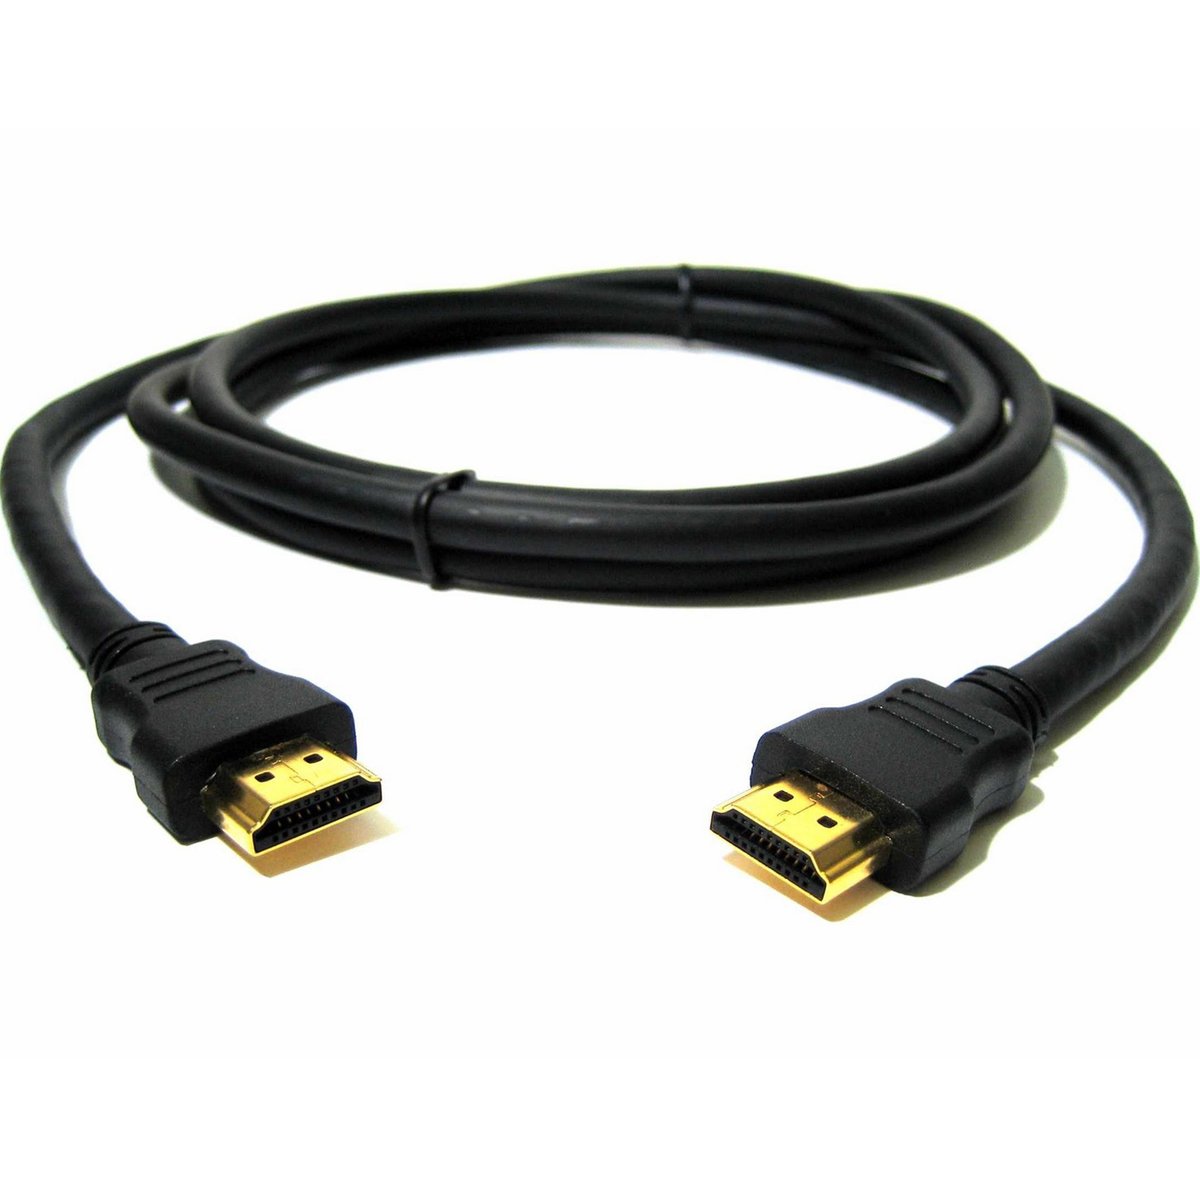 Iends HDMI Cable IE-CA7189 3Metre